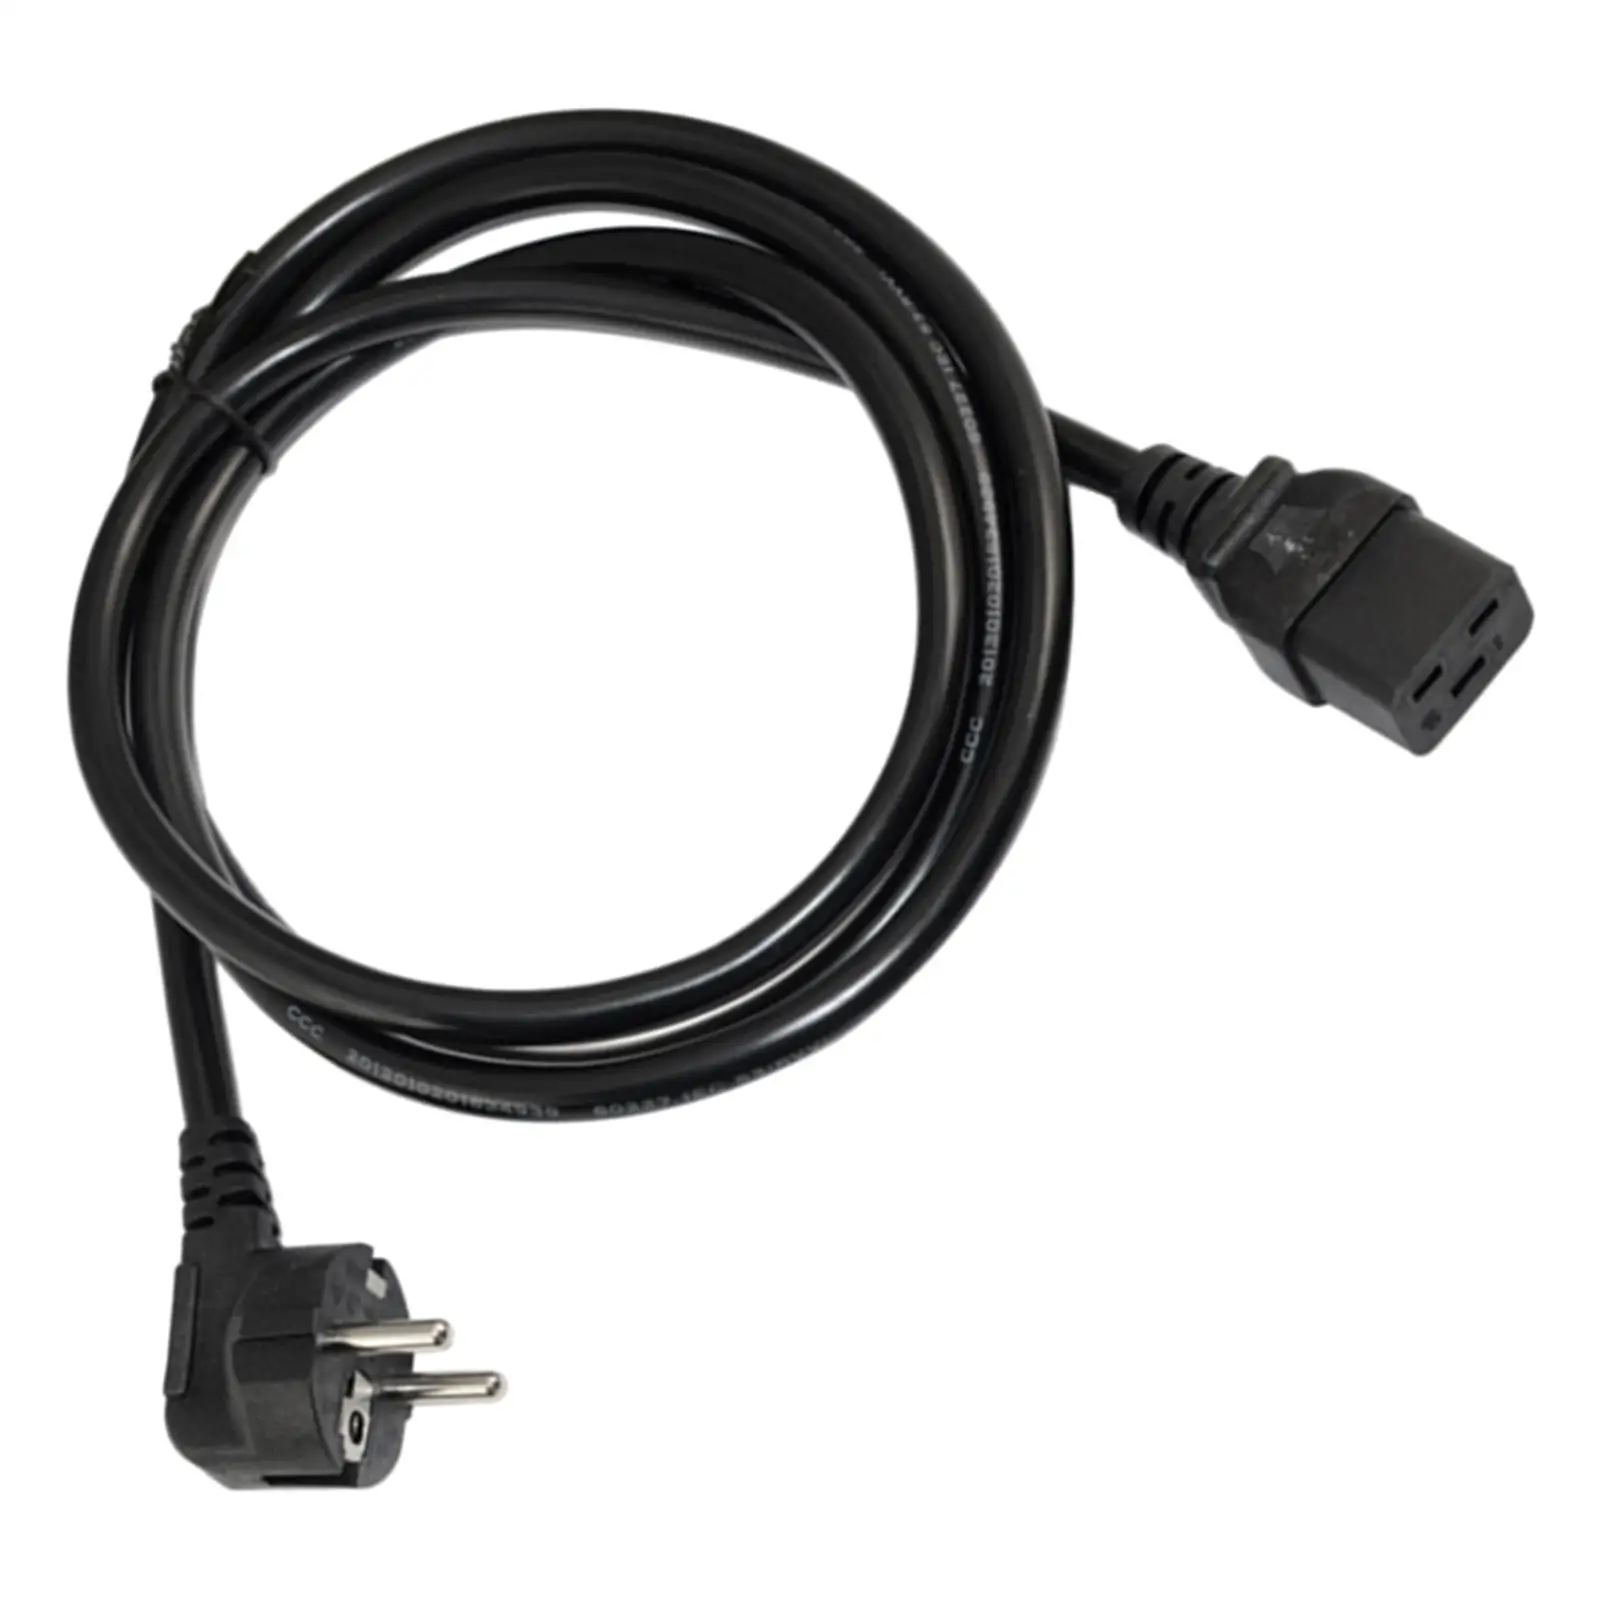 European to C19 Power Cords good Conductivity Power Extension Cable Laptop Adapter